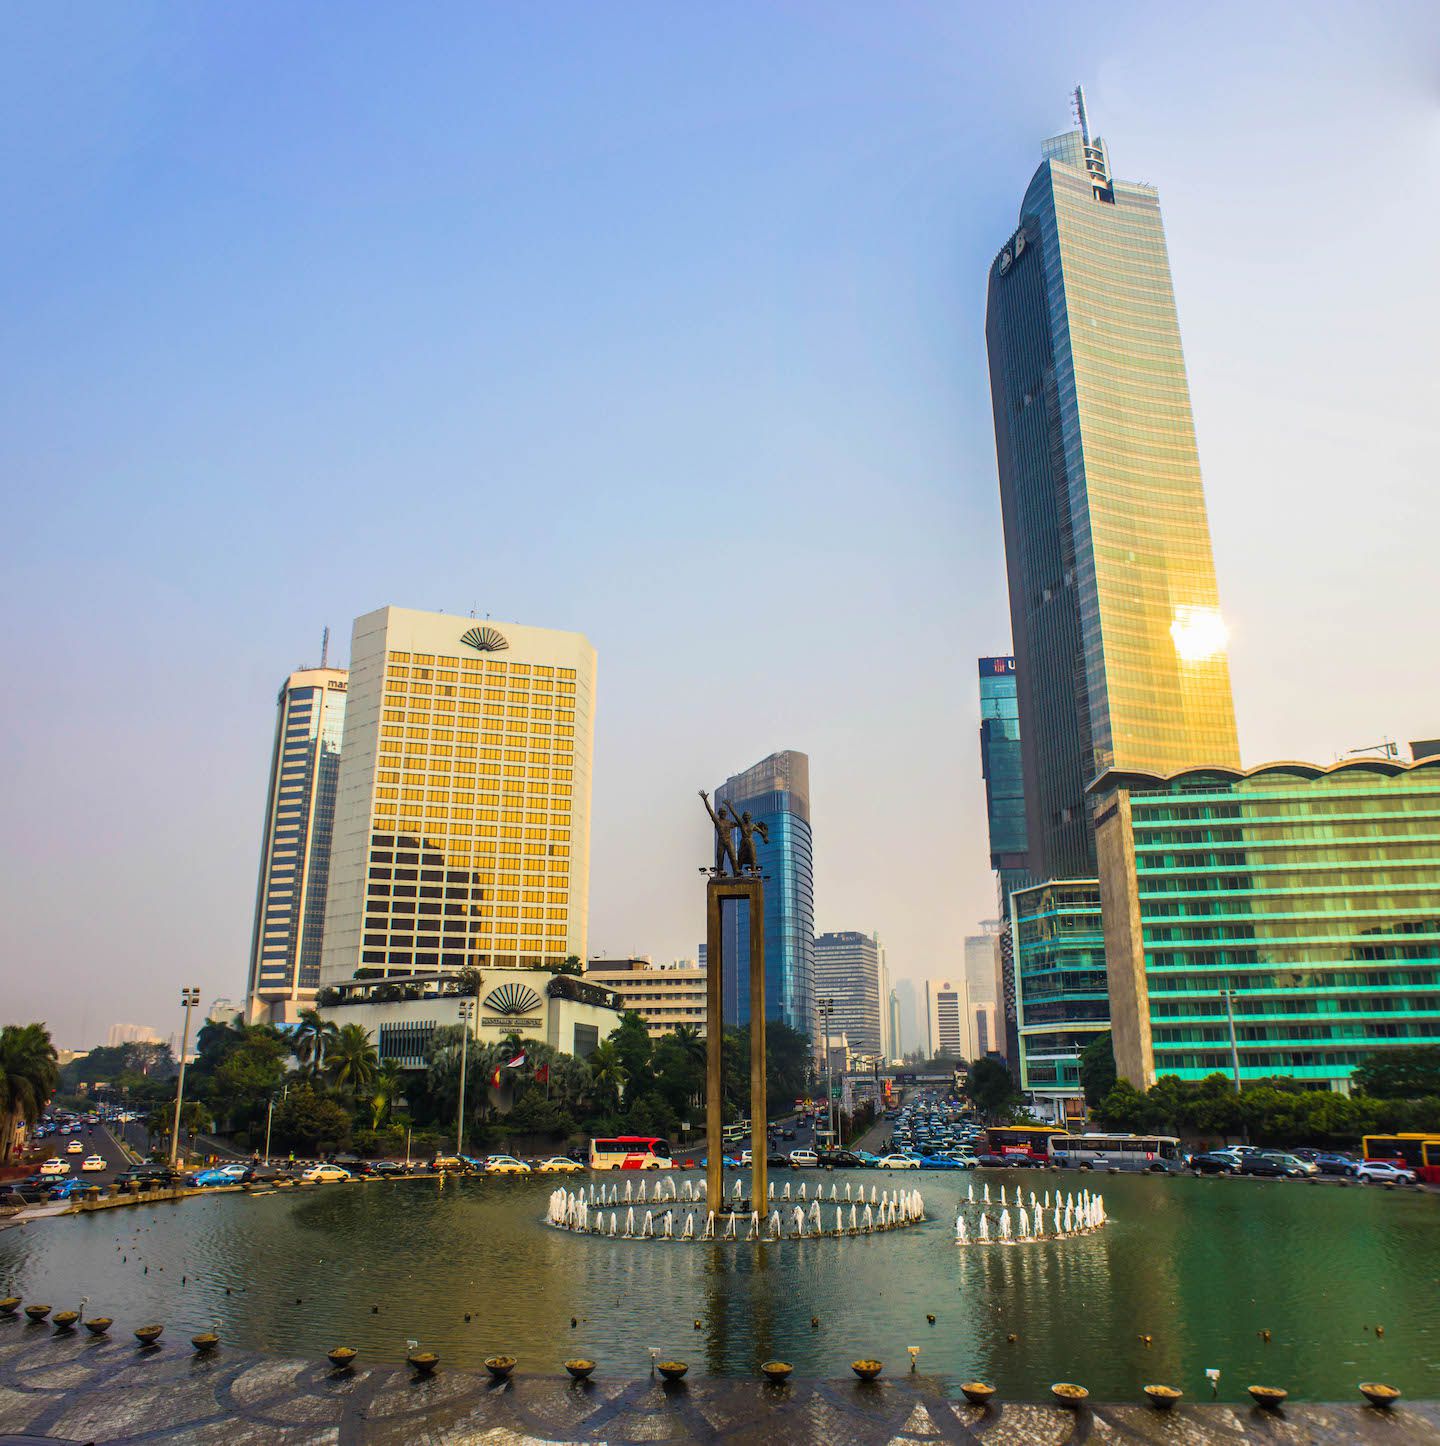 View of the Selamat Datang Monument in Central Jakarta, Indonesia